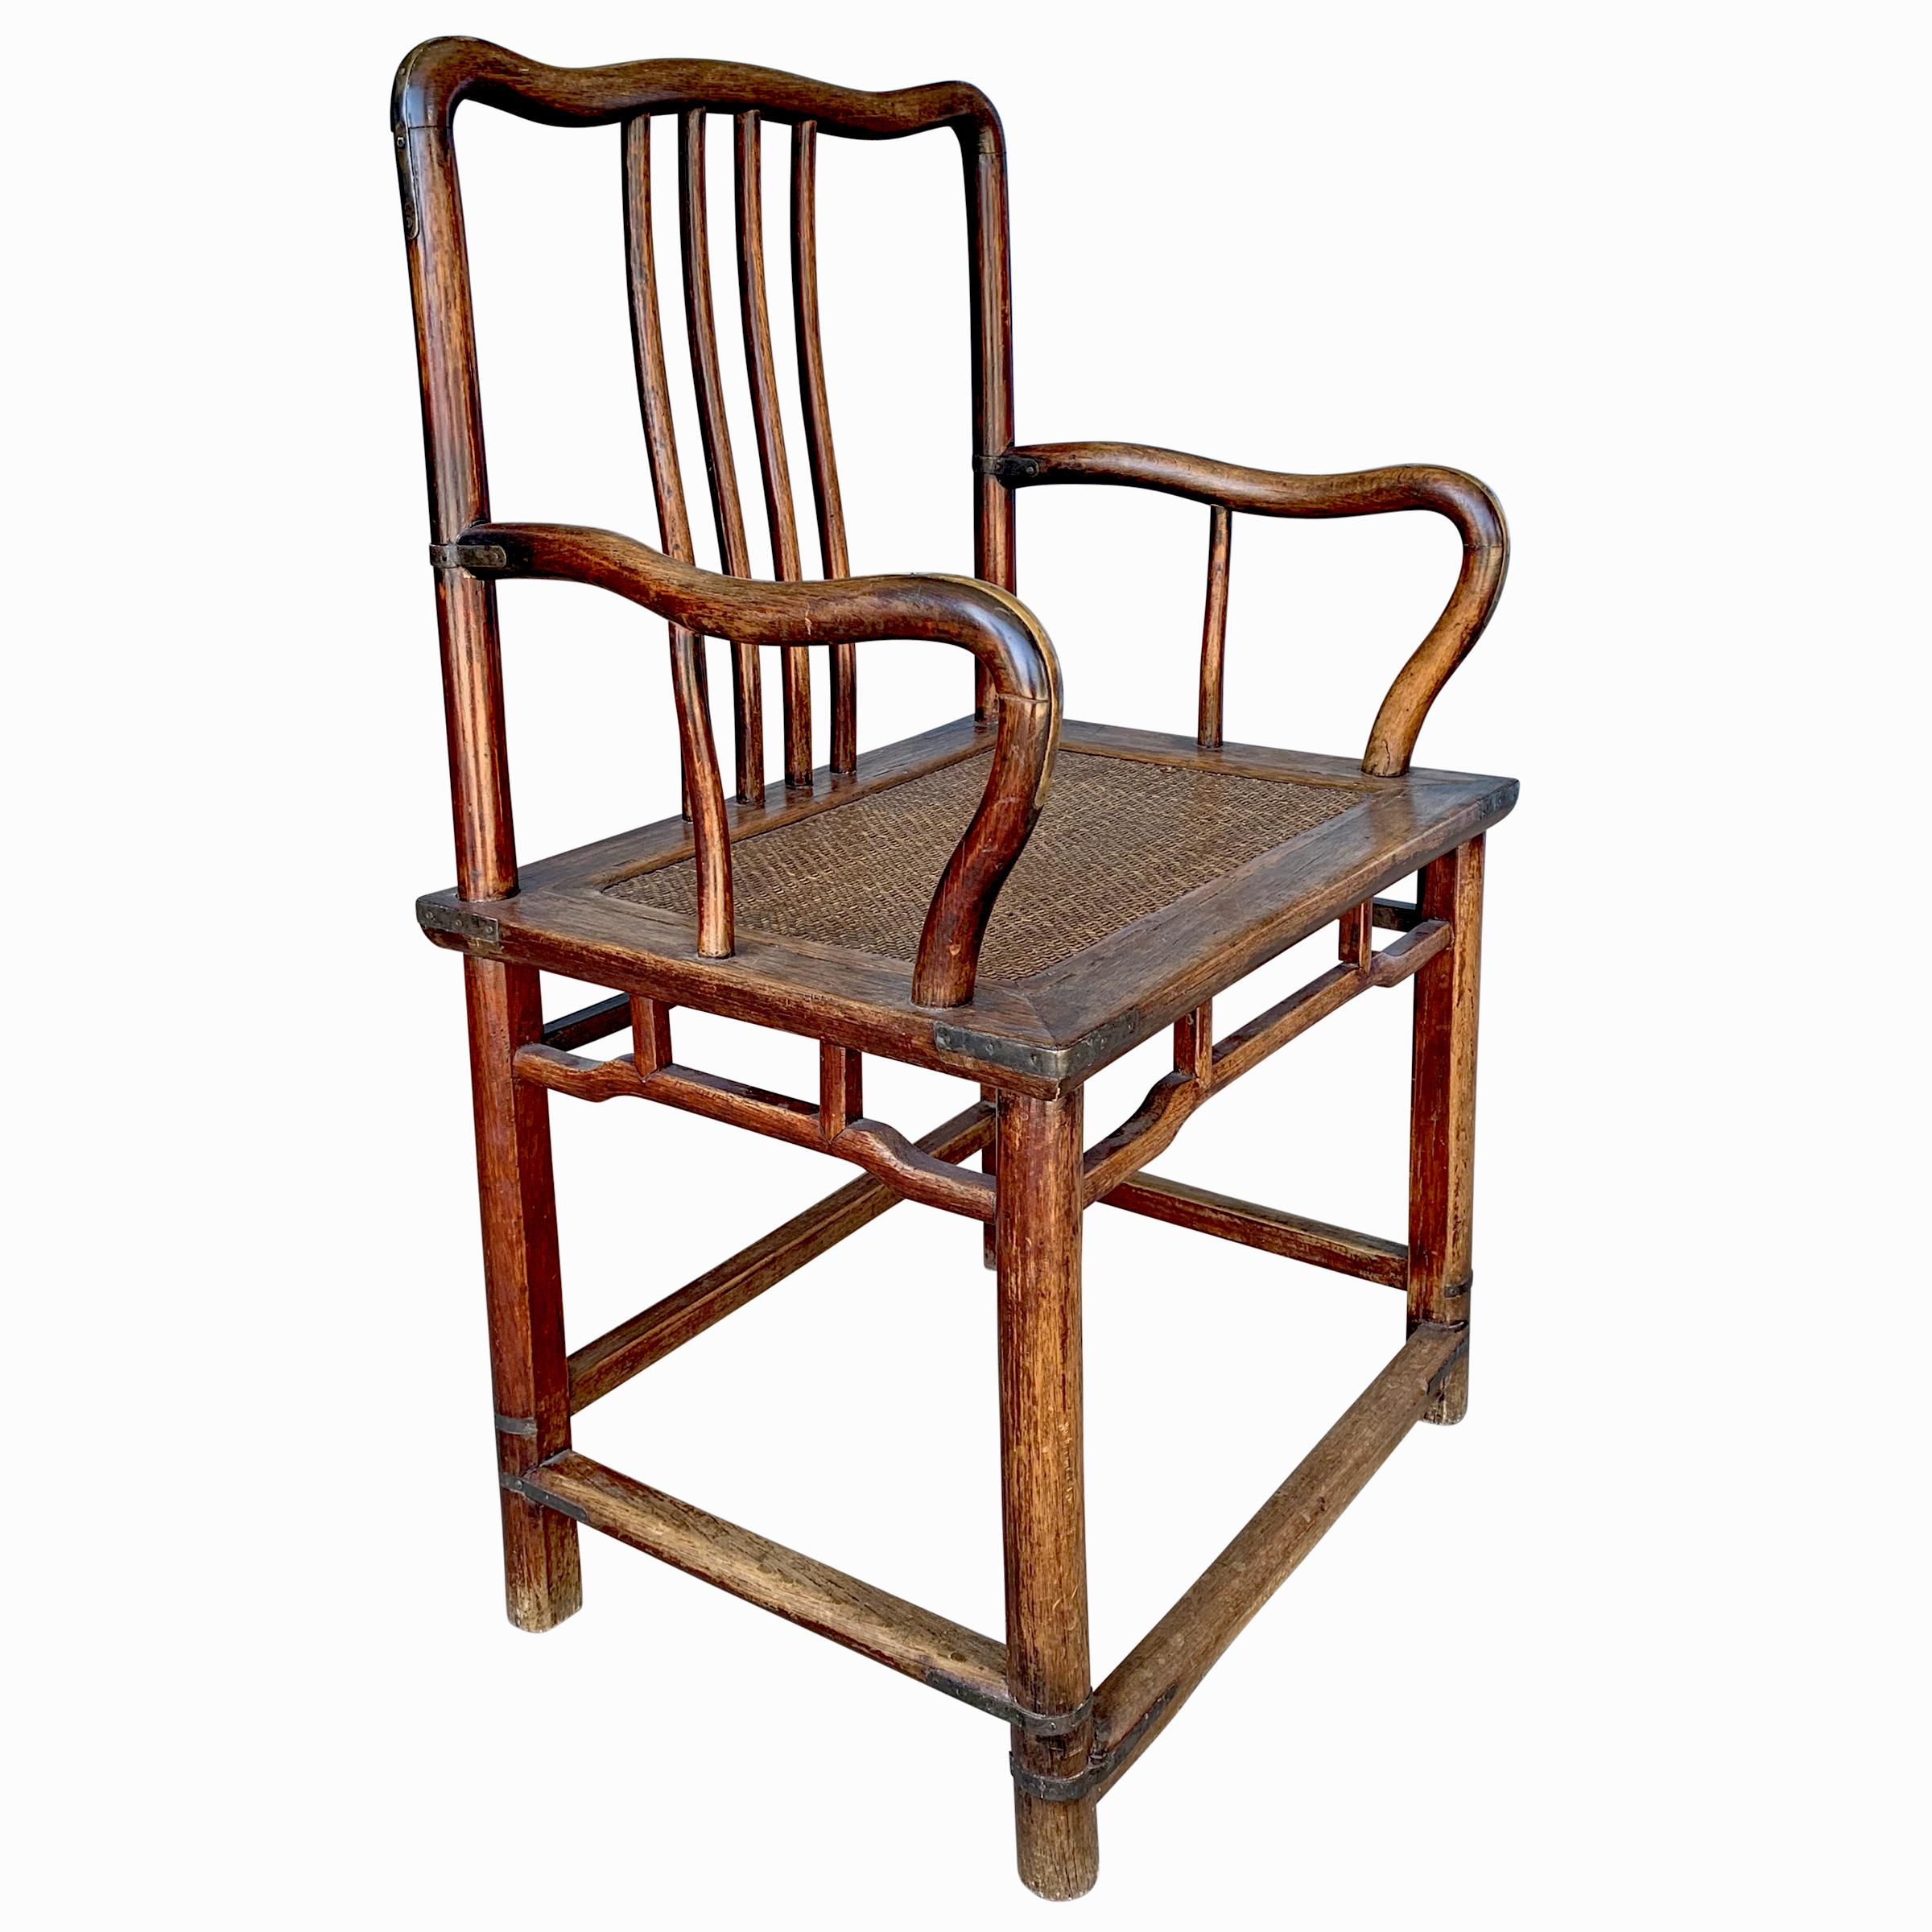 A fine 19th century Chinese huali (rosewood) Southern Administrator's armchair with gently curved crestrail and arms, four-spindle backsplat, brass fittings, woven cane seat, and traces of the original sangre-de-boeuf glaze.